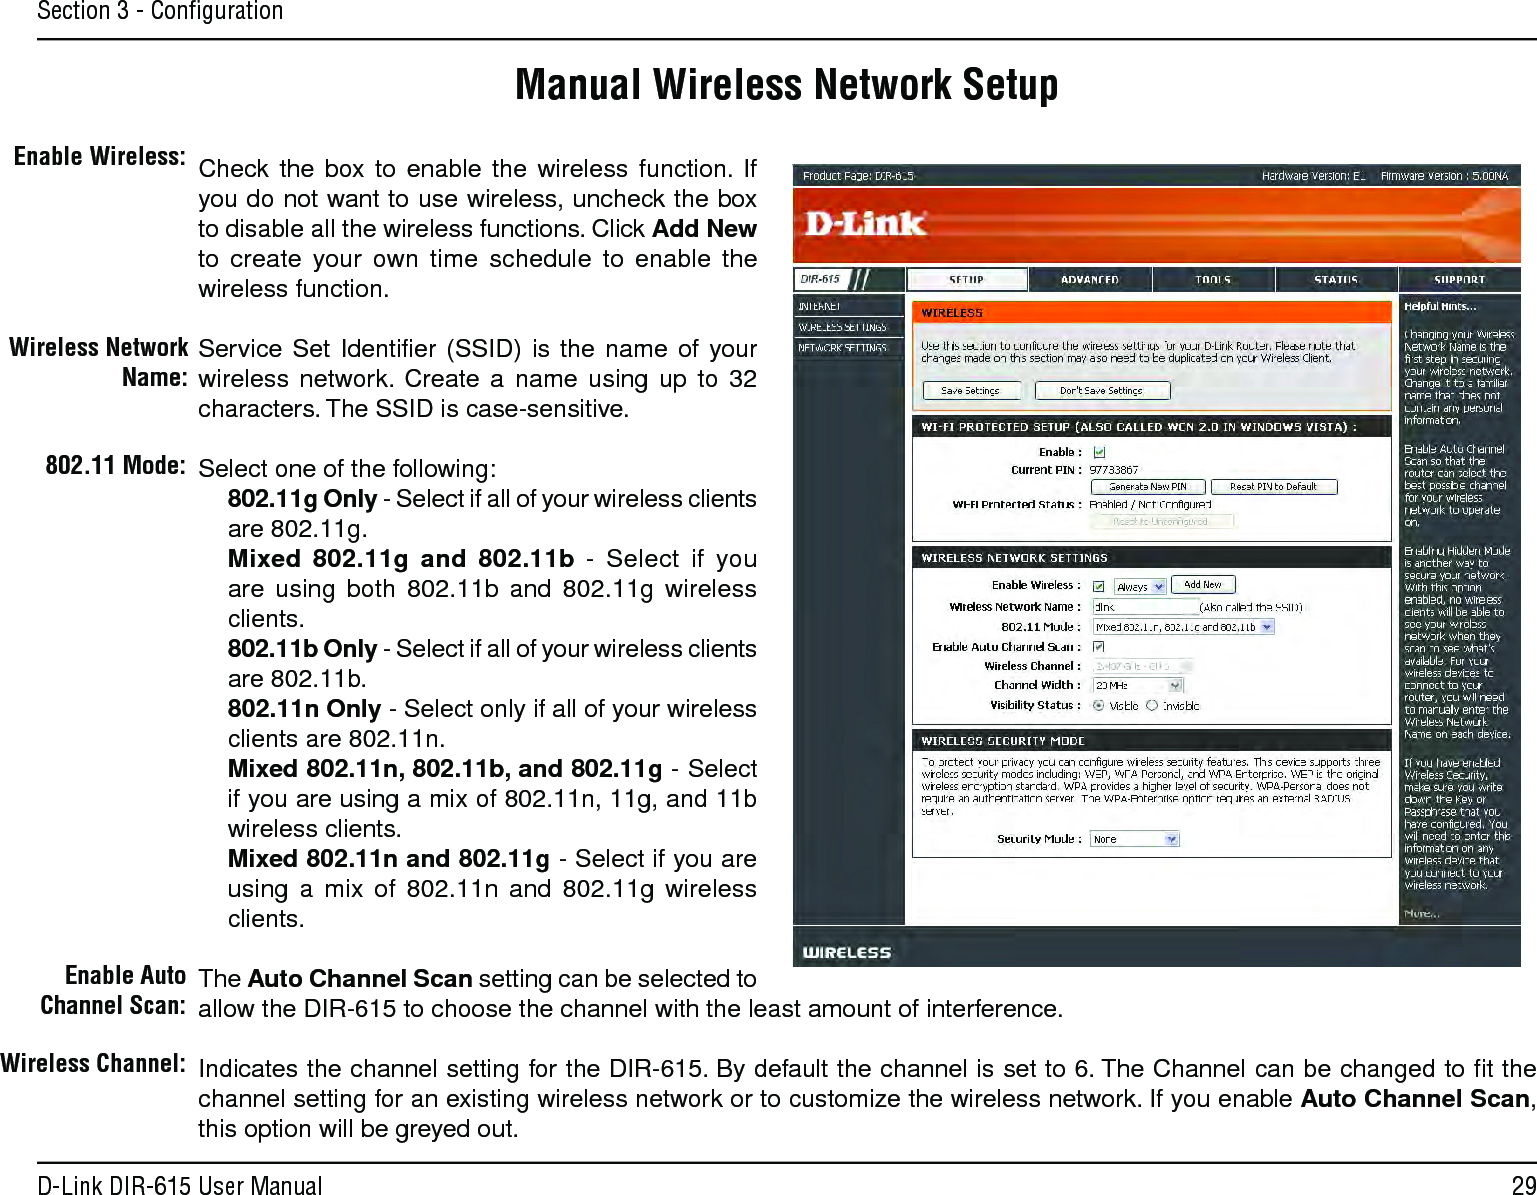 29D-Link DIR-615 User ManualSection 3 - ConﬁgurationManual Wireless Network SetupCheck  the  box  to  enable  the  wireless  function.  If you do not want to use wireless, uncheck the box to disable all the wireless functions. Click Add New to  create  your  own  time  schedule  to  enable  the wireless function. Service  Set  Identiﬁer (SSID)  is  the  name  of  your wireless  network.  Create  a  name  using  up  to  32 characters. The SSID is case-sensitive.Select one of the following:802.11g Only - Select if all of your wireless clients are 802.11g.Mixed  802.11g  and  802.11b  -  Select  if  you are  using  both  802.11b  and  802.11g  wireless clients.802.11b Only - Select if all of your wireless clients are 802.11b.802.11n Only - Select only if all of your wireless clients are 802.11n.Mixed 802.11n, 802.11b, and 802.11g - Select if you are using a mix of 802.11n, 11g, and 11b wireless clients.Mixed 802.11n and 802.11g - Select if you are using  a  mix  of  802.11n  and  802.11g  wireless clients.The Auto Channel Scan setting can be selected to allow the DIR-615 to choose the channel with the least amount of interference.Indicates the channel setting for the DIR-615. By default the channel is set to 6. The Channel can be changed to ﬁt the channel setting for an existing wireless network or to customize the wireless network. If you enable Auto Channel Scan, this option will be greyed out.Enable Wireless:Wireless Network Name:802.11 Mode:Enable Auto Channel Scan:Wireless Channel: